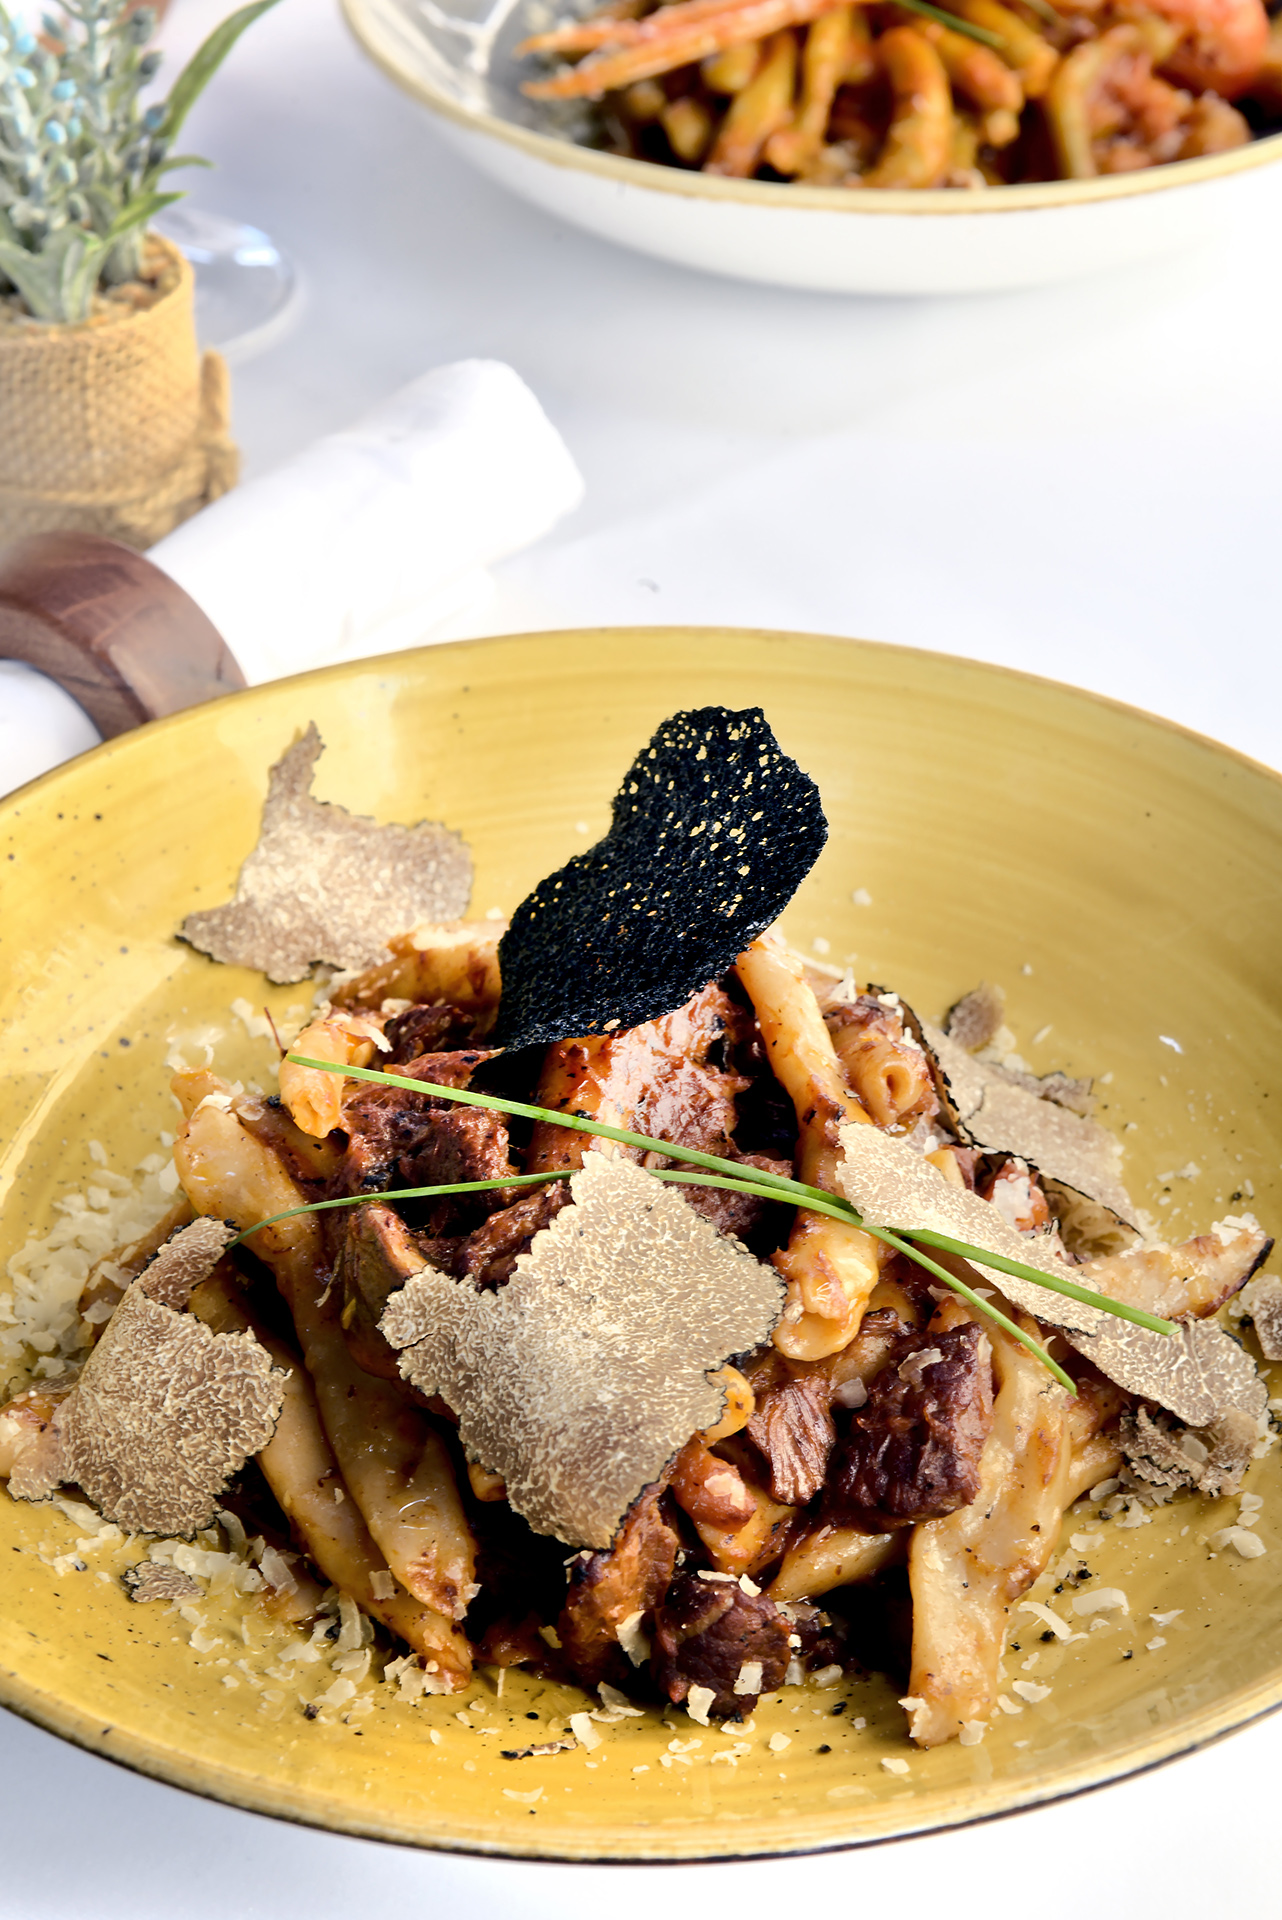 Enjoy traditional Korcula-style macaroni created by chef Kristian Tari and discover the place with for pasta in Zagreb at Makarun